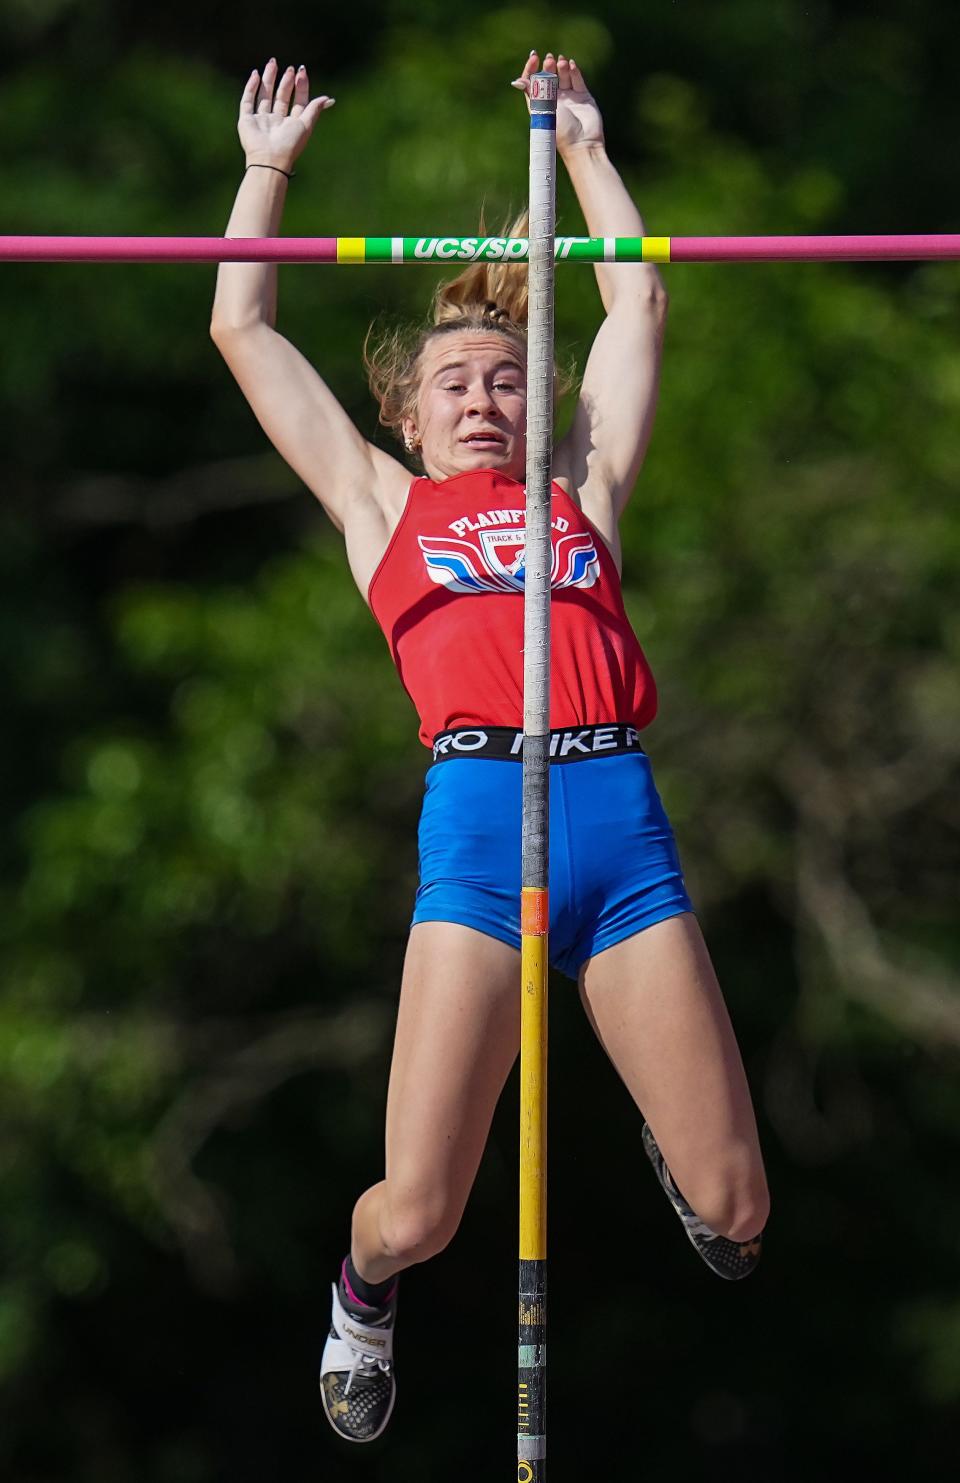 Plainfield Mackenzie VanBibber competes in the pole vault during in the IHSAA girls track and field state finals on Friday, June 3, 2022, at Robert C. Haugh Track & Field Complex, at Indiana University in Bloomington, Indiana.